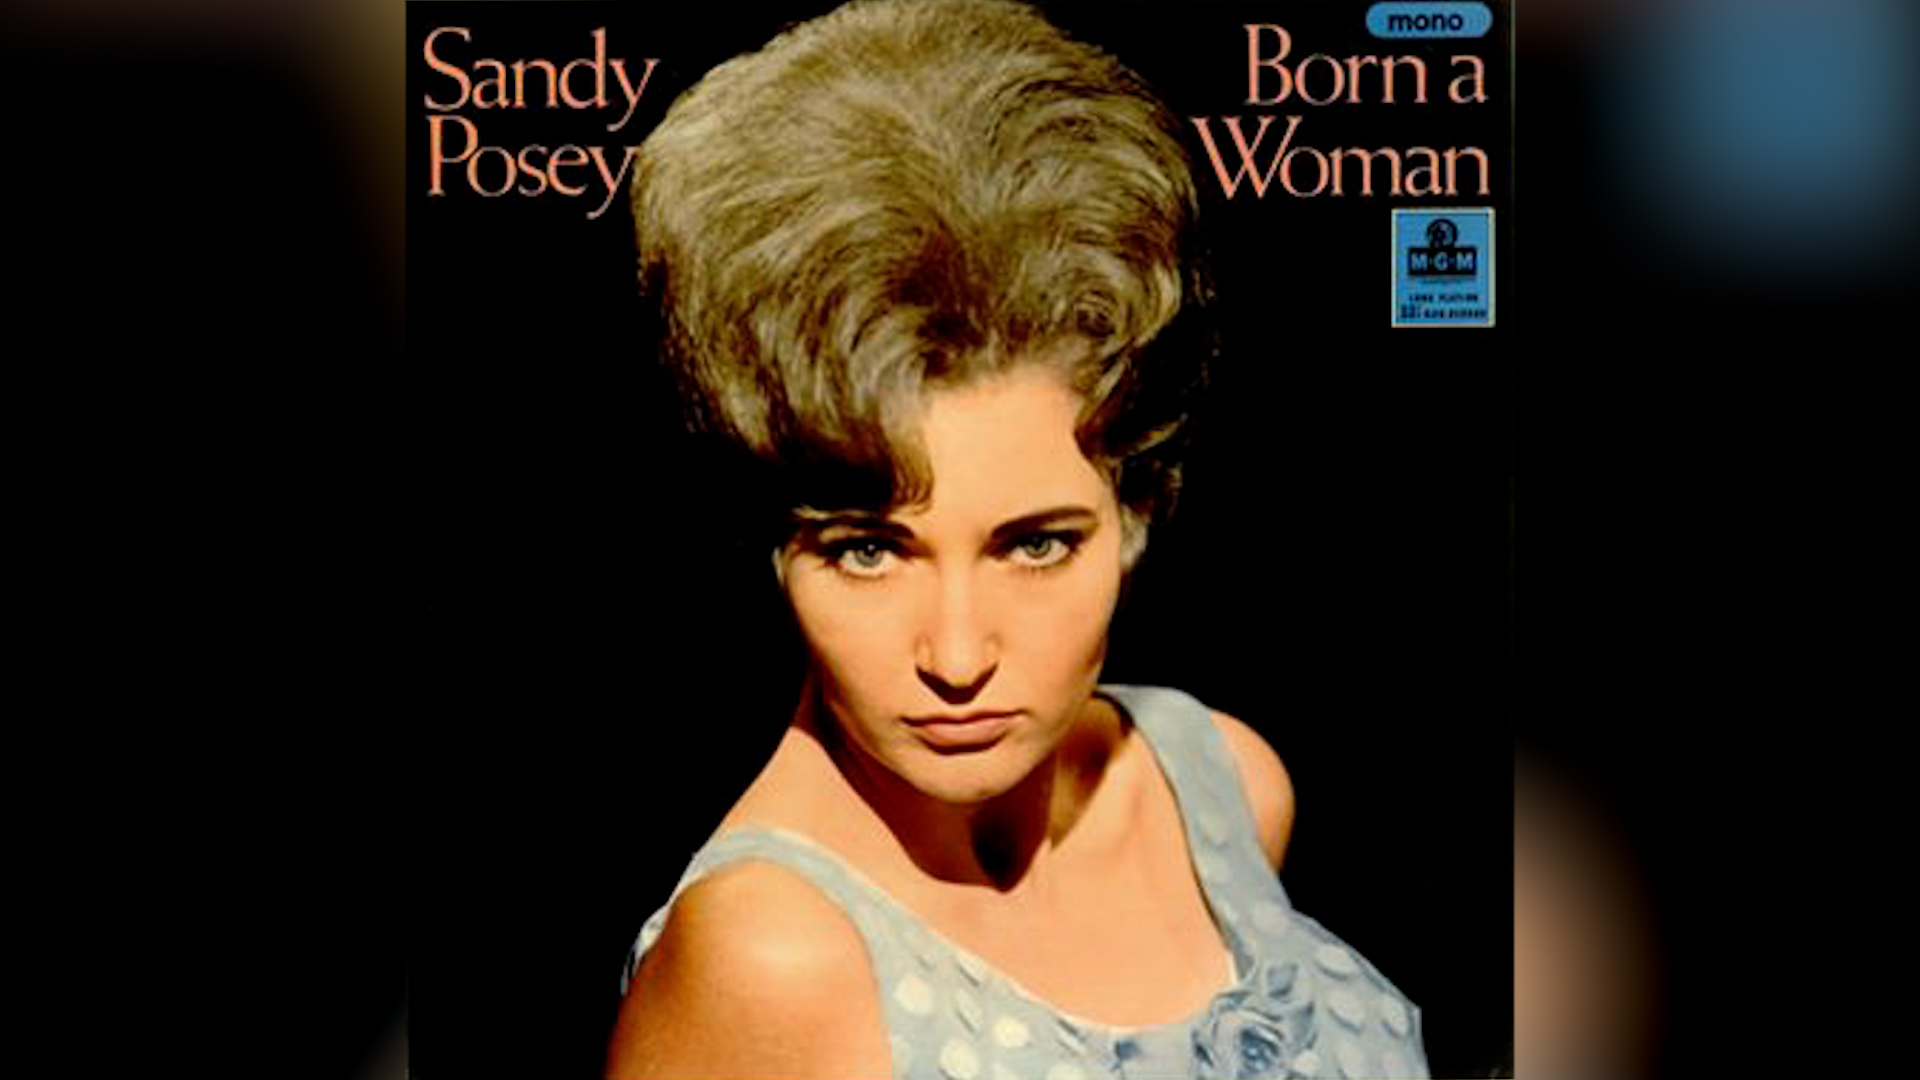 Listen to Sandy Posey's Born A Woman